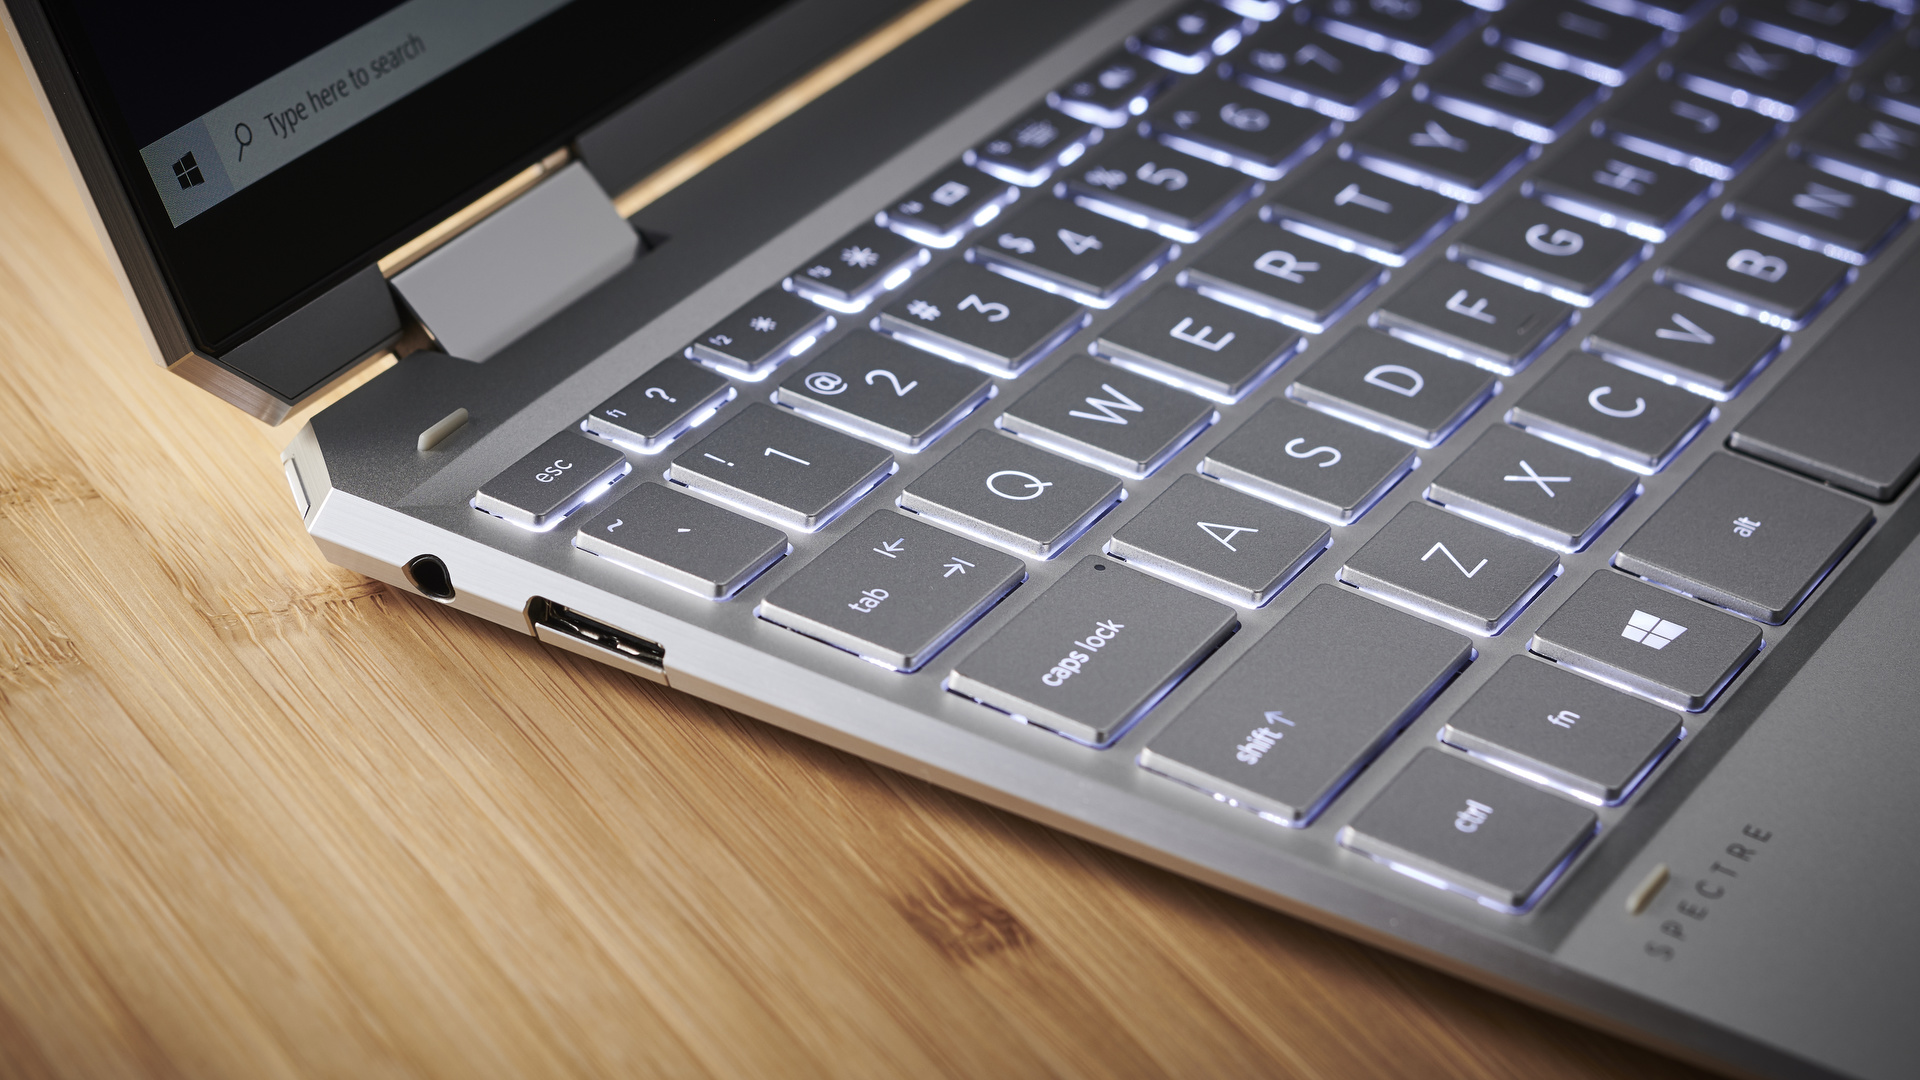 HP Spectre x360 (2021) on a wooden desk showing off its ports and part of its keyboard